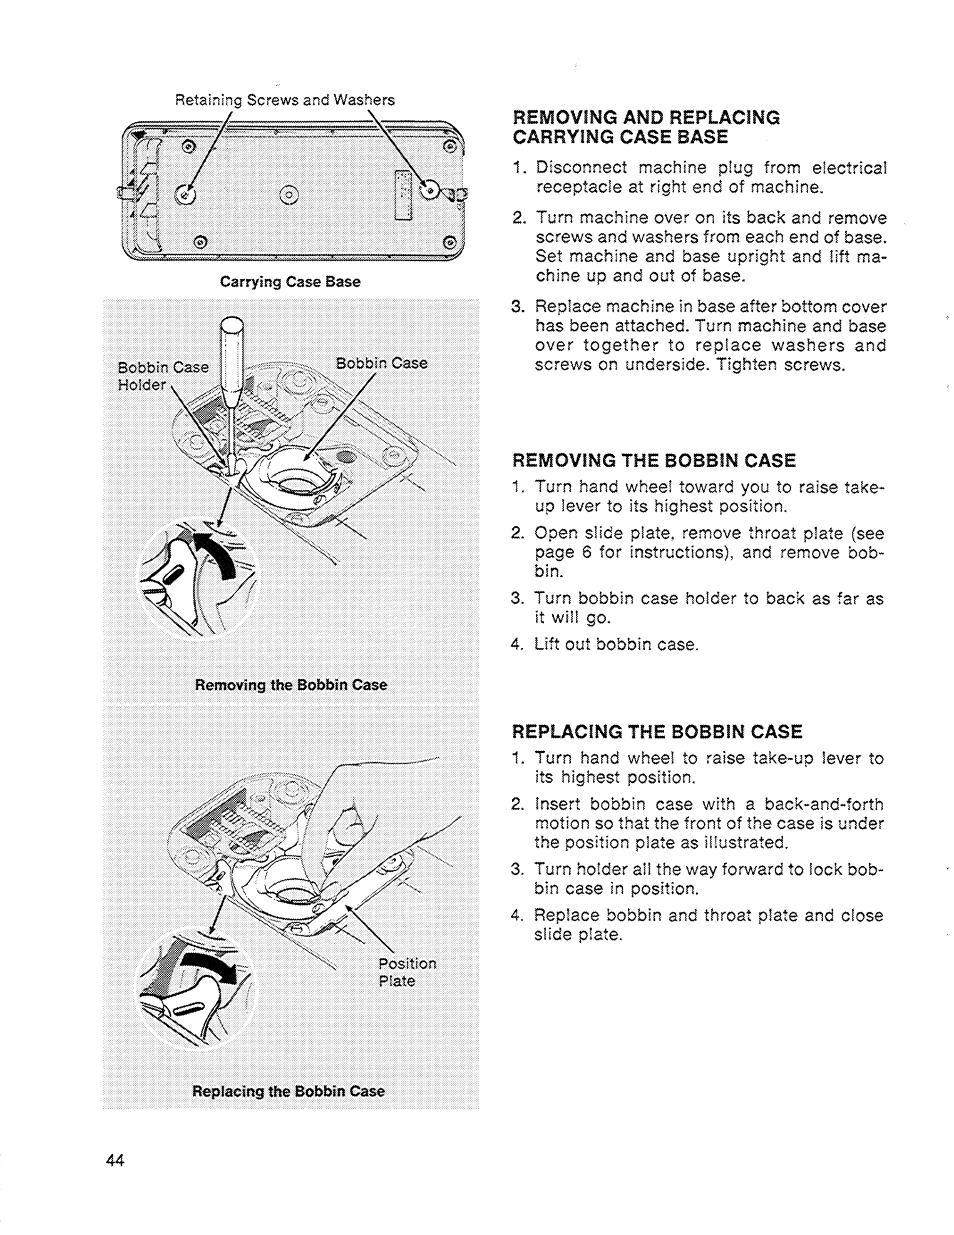 Removimg and replacing, Carrying case base, Removing the bobbin case | Replacing the bobbin case | SINGER 714 Graduate User Manual | Page 46 / 52